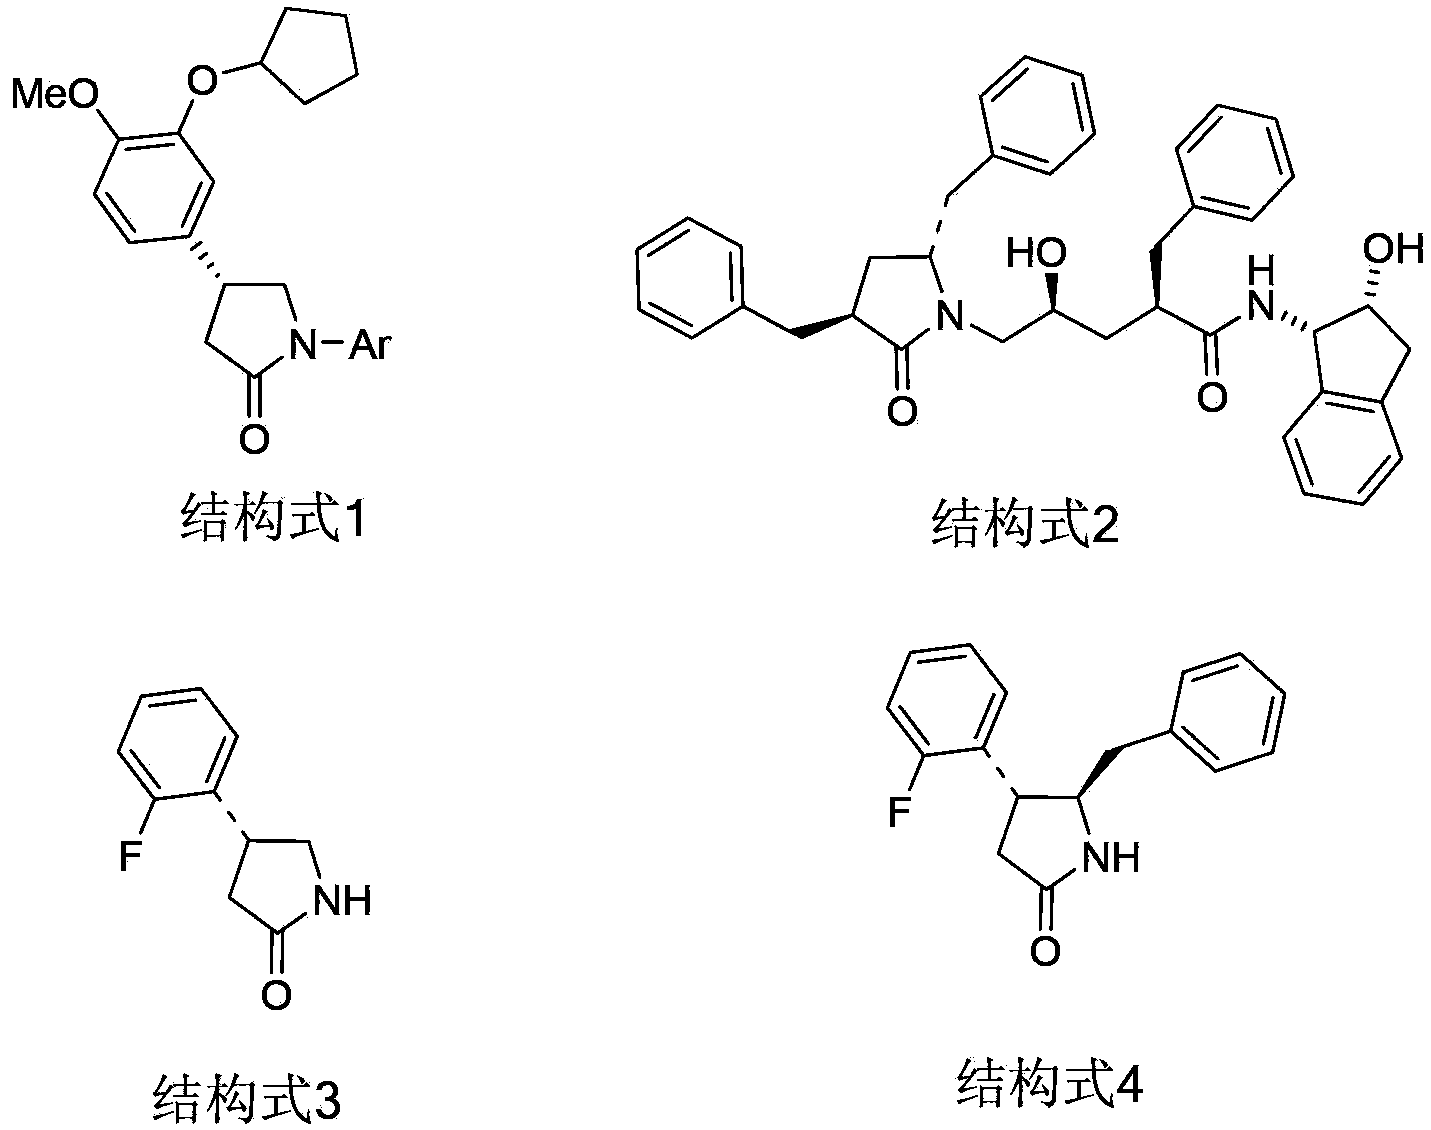 New use of 4, 5-disubstituted-2-pyrrolidone compound